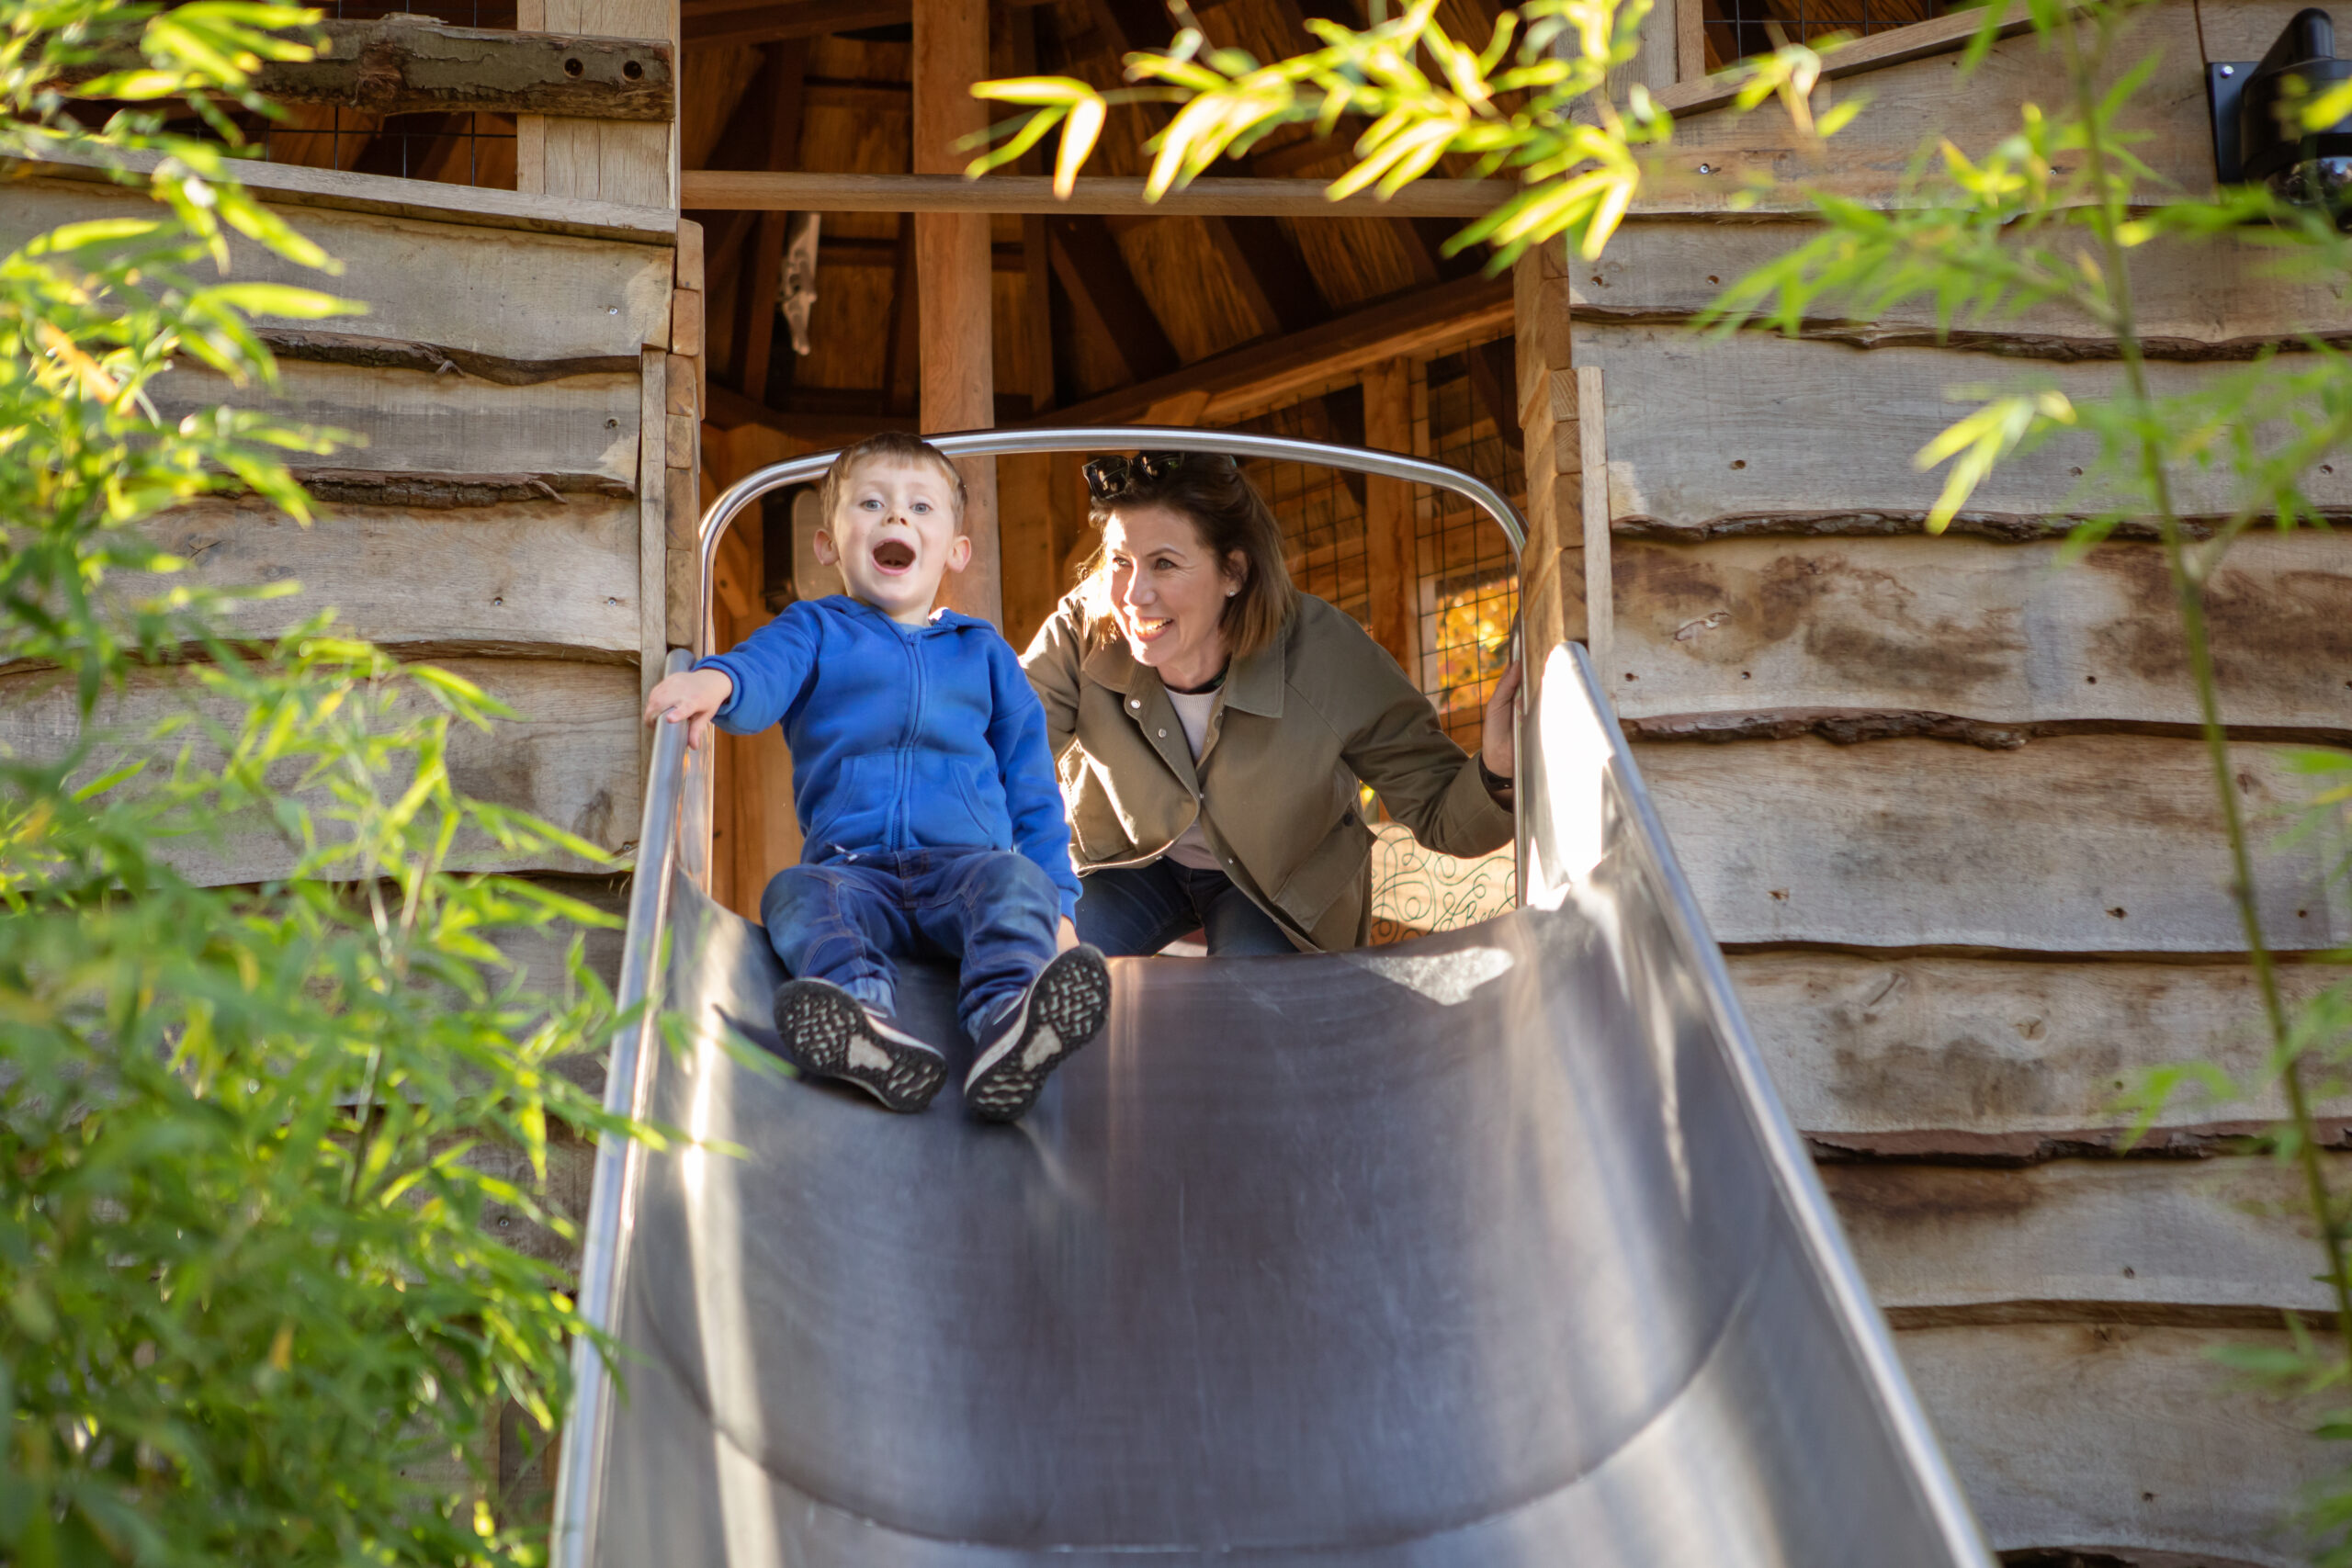 Young child at the top of the slide being encouraged by an adult.